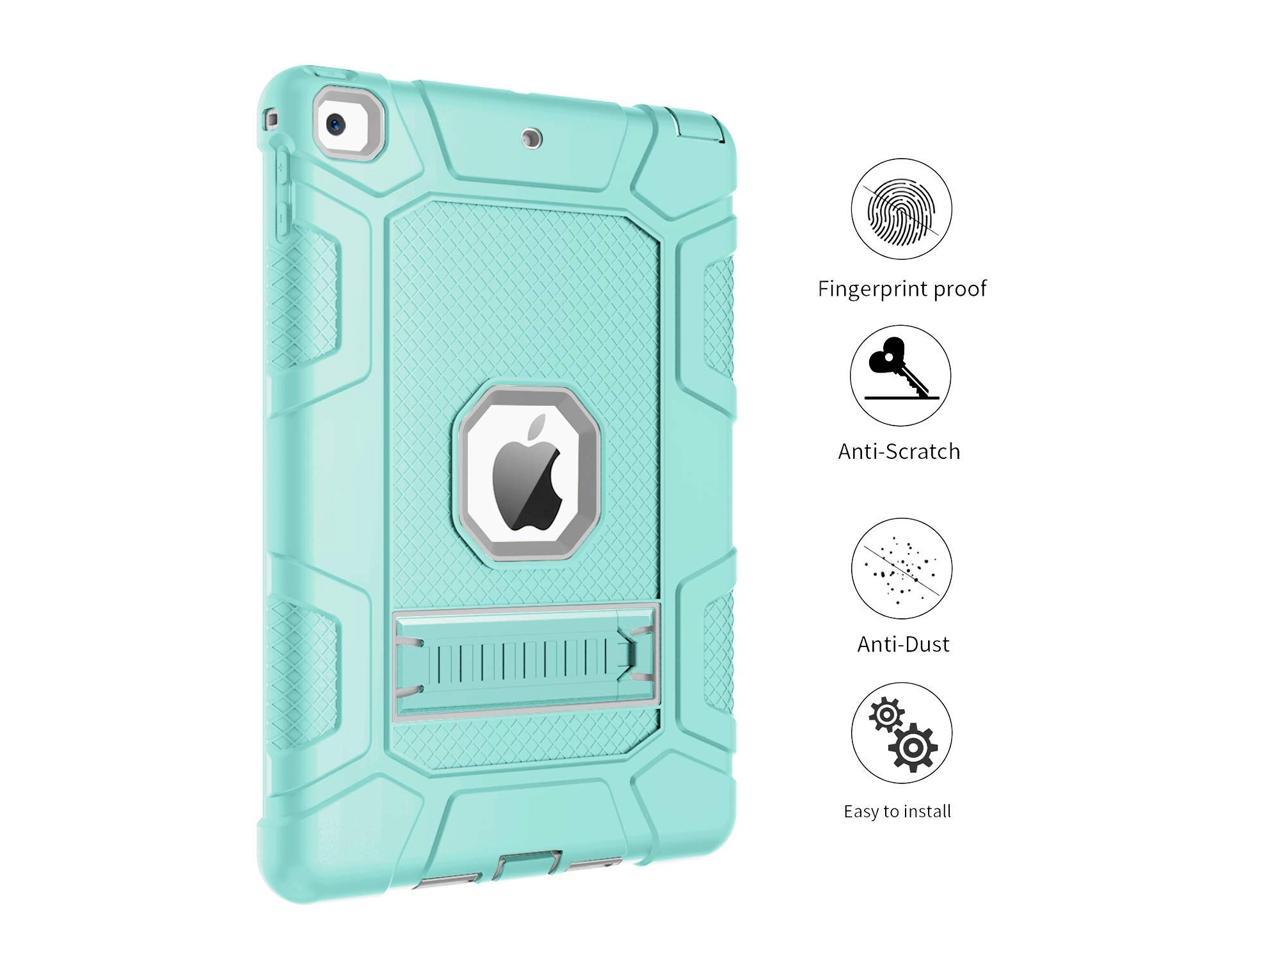 iPad case 3 in 1 Heavy Duty Hybrid Soft Silicone Hard Plastic Cover with Kickstand Rugged Shockproof Protective Case for 9.7 iPad 2018/2017 - e4cents